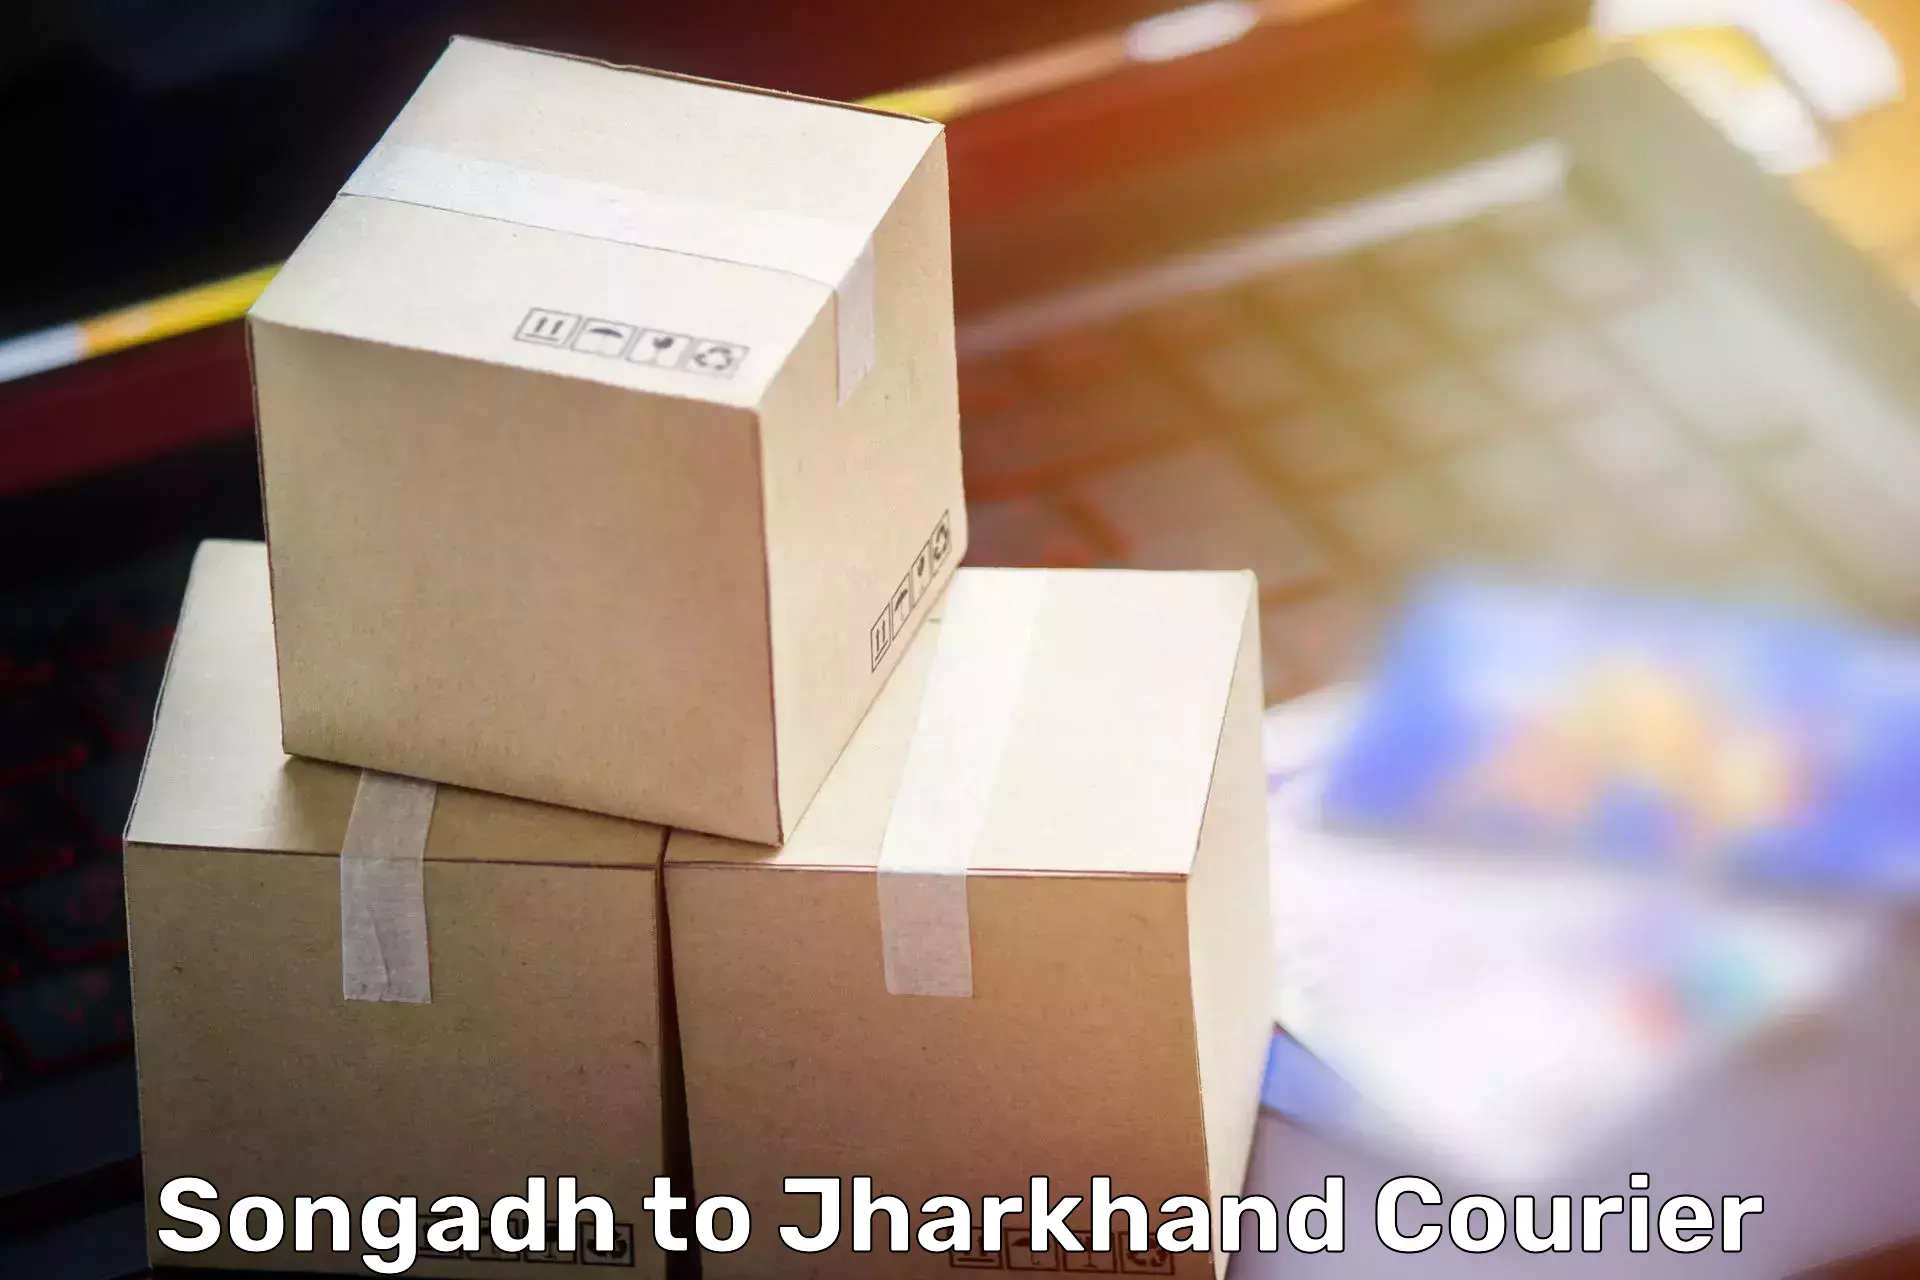 Moving and storage services Songadh to Jamshedpur